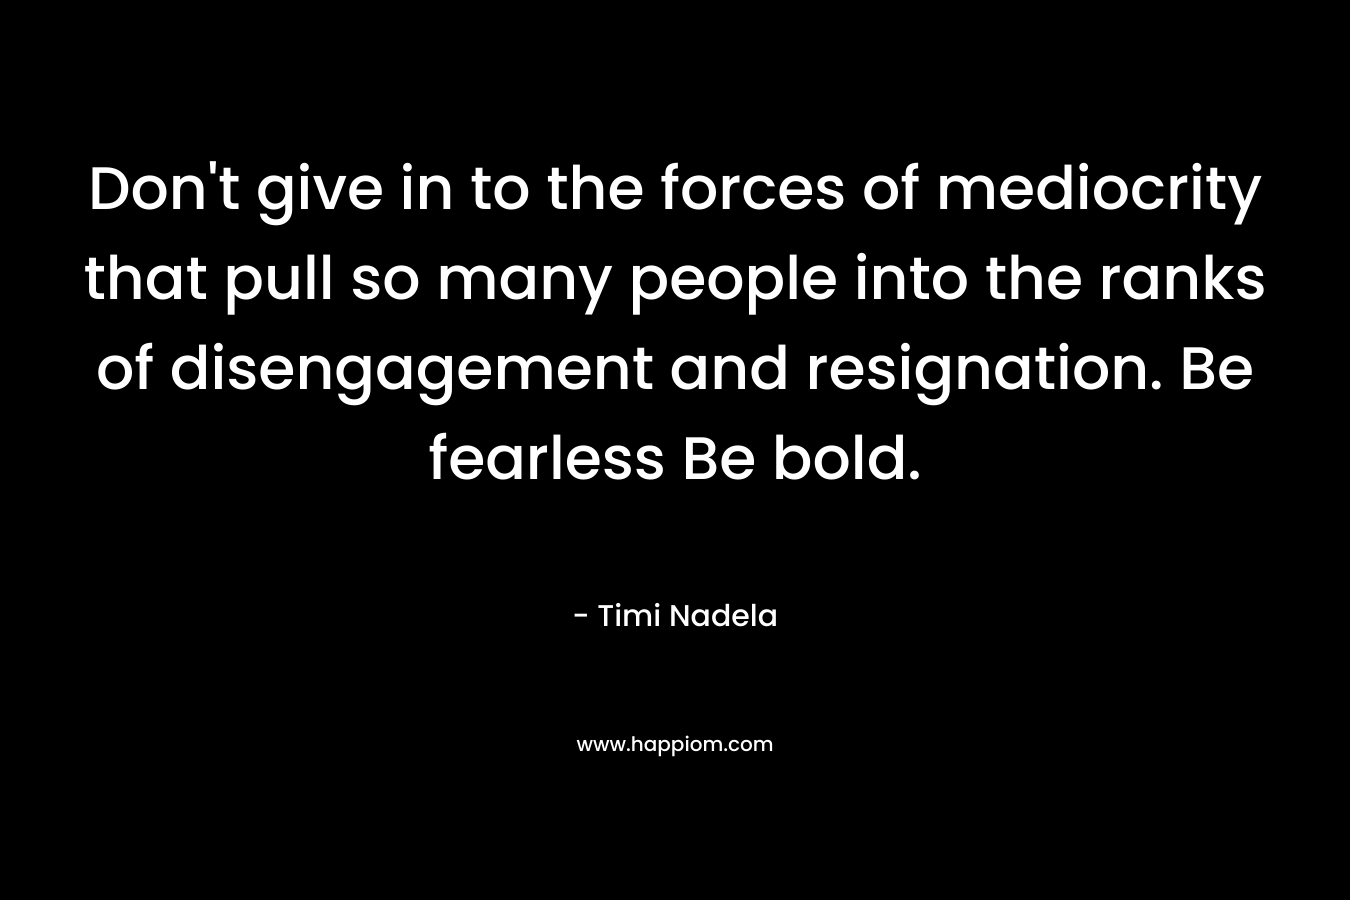 Don’t give in to the forces of mediocrity that pull so many people into the ranks of disengagement and resignation. Be fearless Be bold. – Timi Nadela